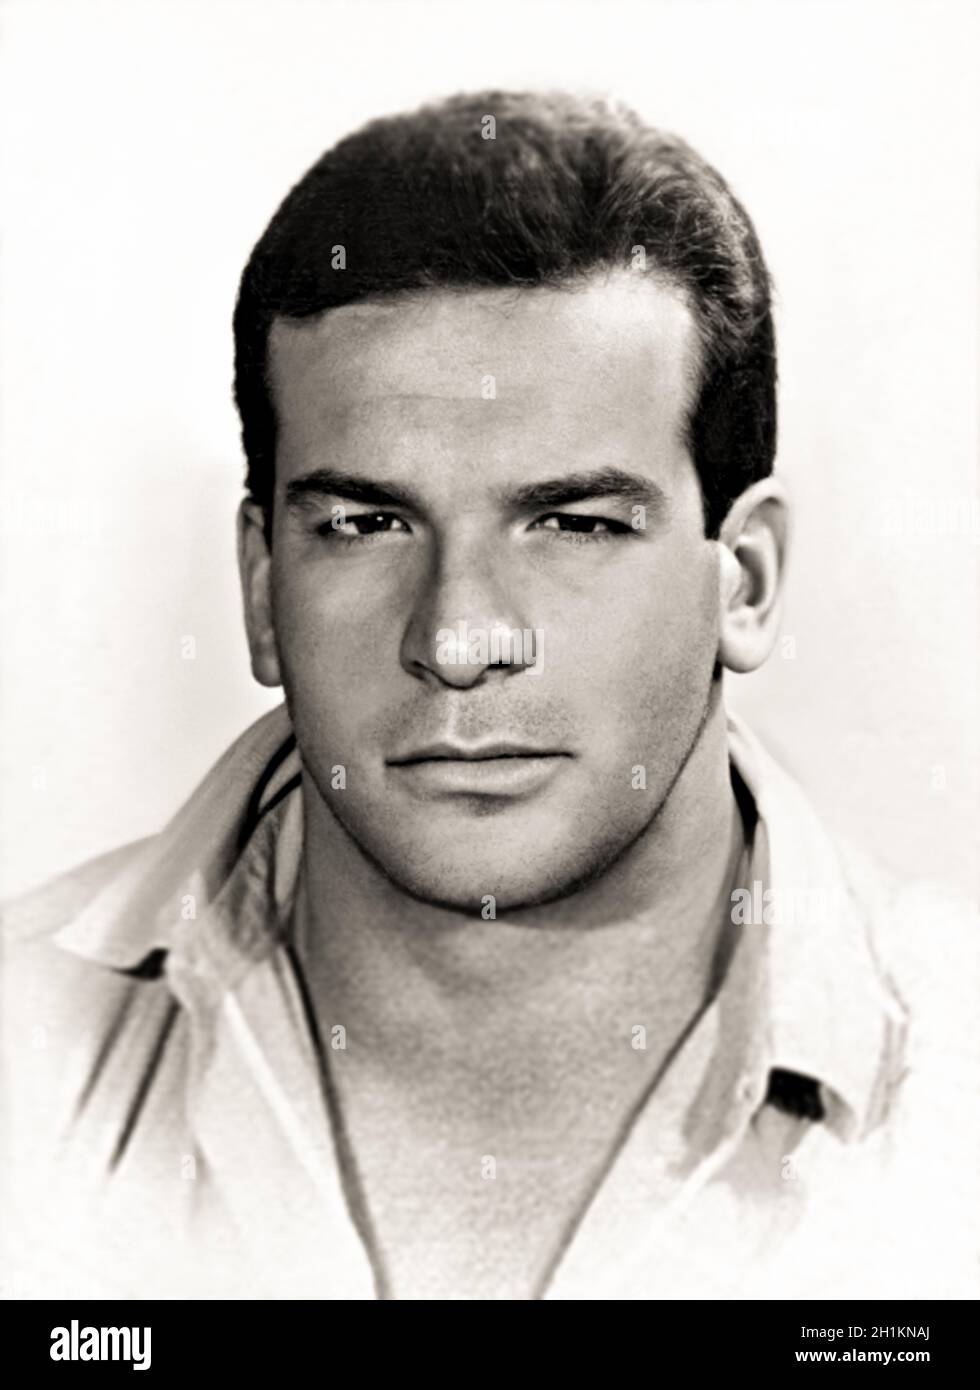 1956 , Rome , ITALY : The italian celebrated actor , professional swimmer and water polo player CARLO PEDERSOLI aka BUD SPENCER ( 1929 - 2016 ), young swimmer aged 27 . Photo taken for the ID pass at 1956 Summer OLYMPICS GAMES in Melburne ( Australia ), in which Pedersoli in the 100 m freestyle still reached the semifinal . After the Olympic Games, along with other promising athletes, he was invited to Yale University , where he spent a few months in the United States , setting his personal best in the 100m freestyle . Unknown photographer .-  HISTORY - FOTO STORICHE - ATTORE - MOVIE - CINEMA Stock Photo